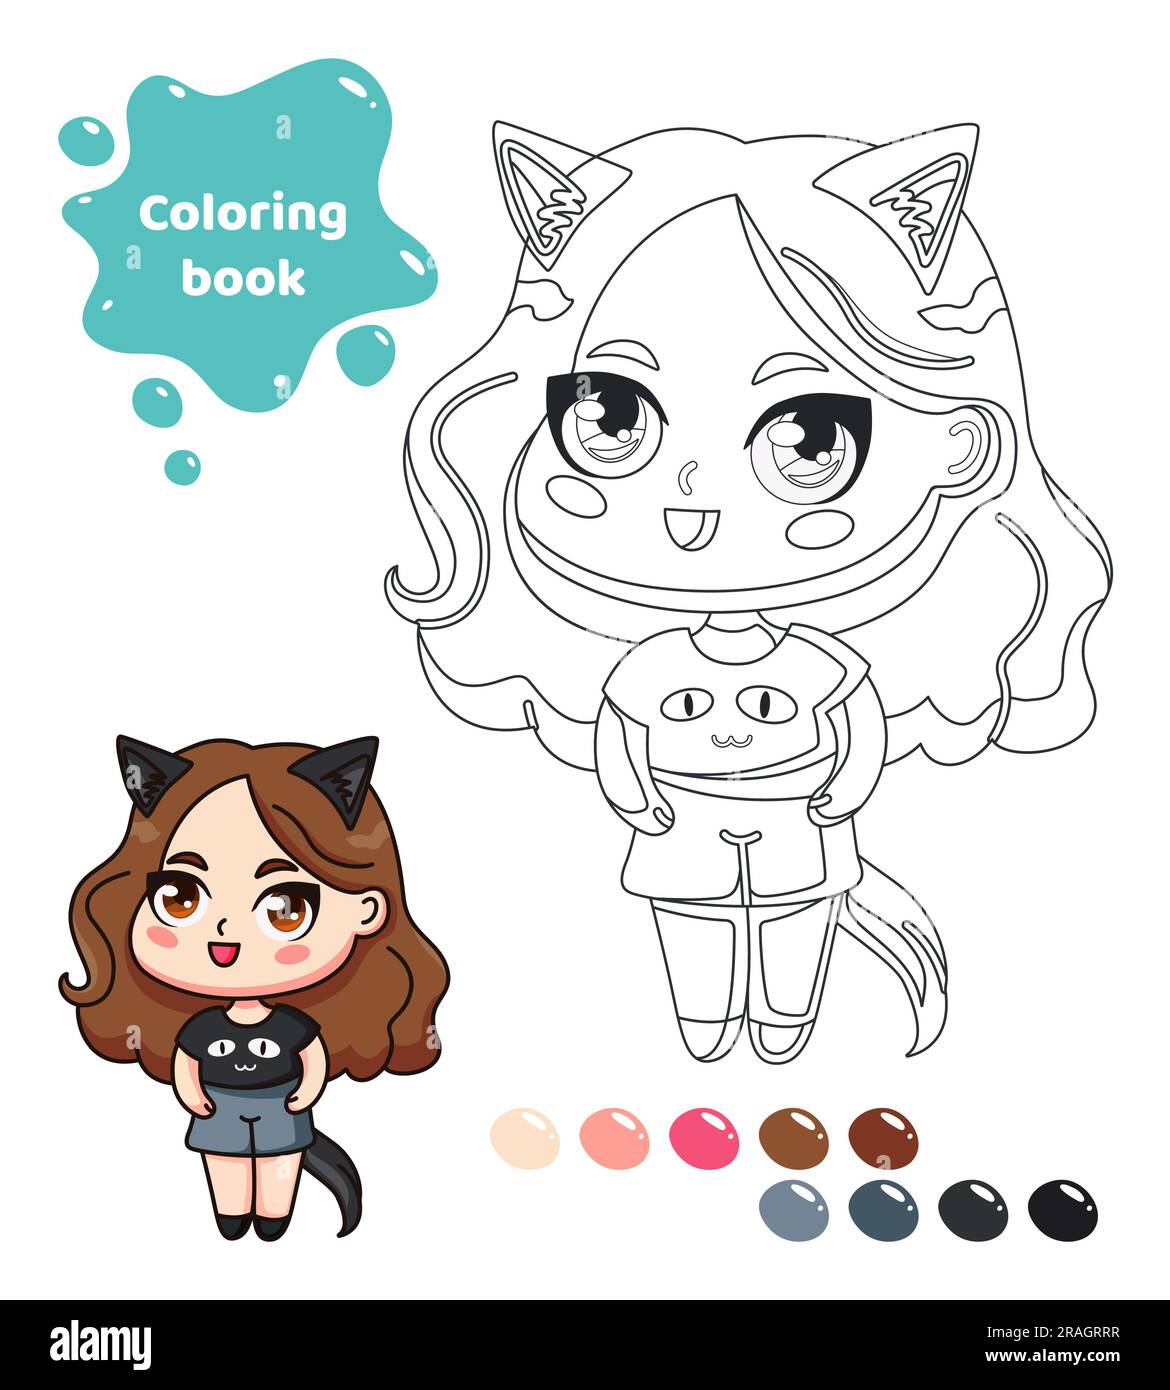 Coloring book for kids. Anime girl with cat ears. Stock Vector